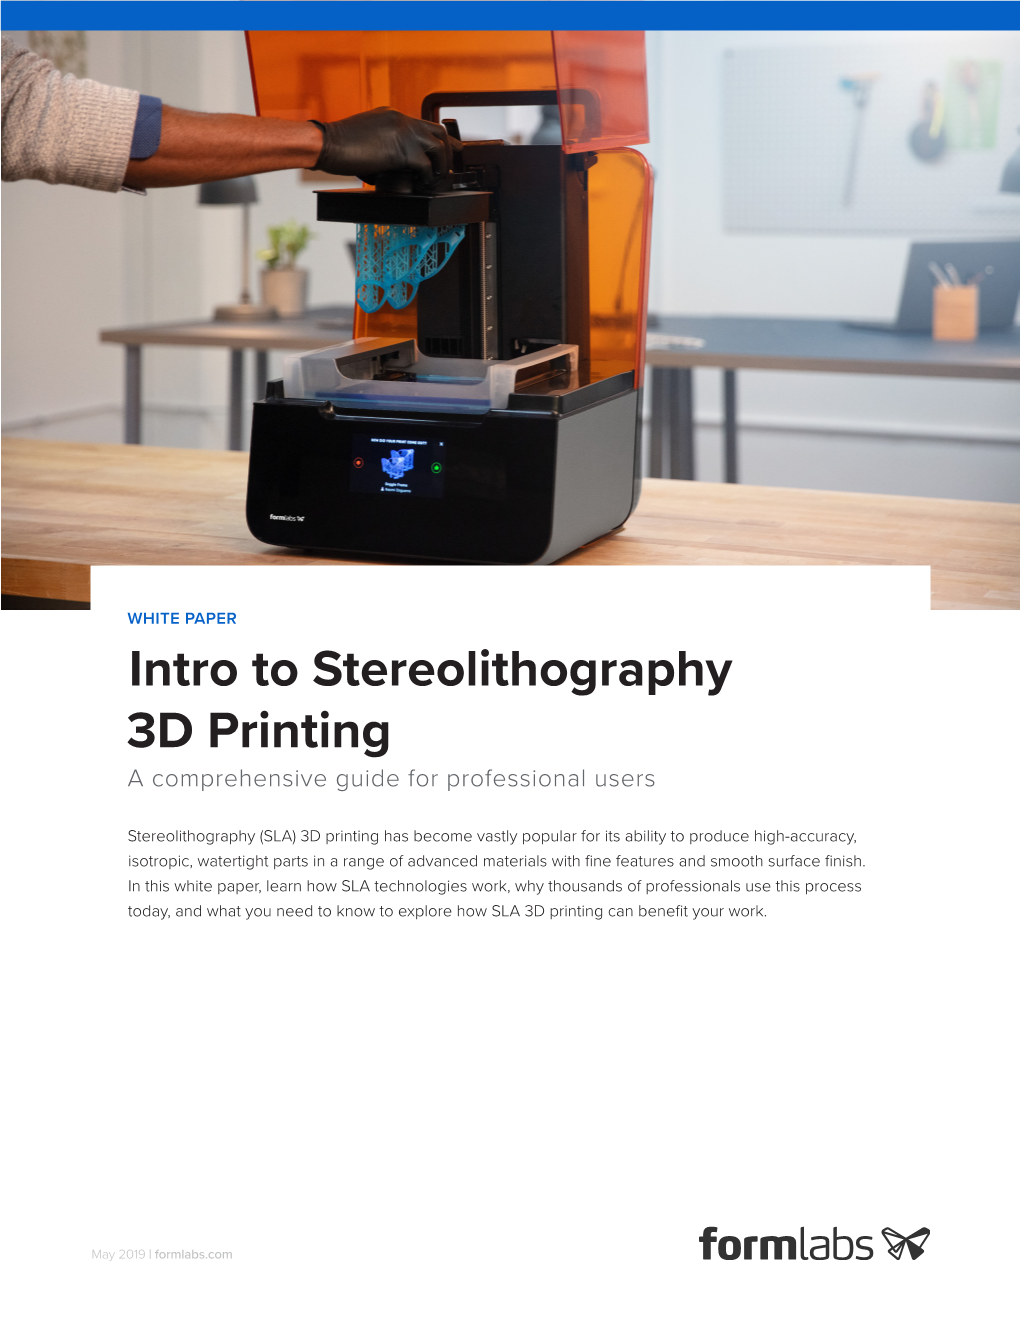 Intro to Stereolithography 3D Printing a Comprehensive Guide for Professional Users